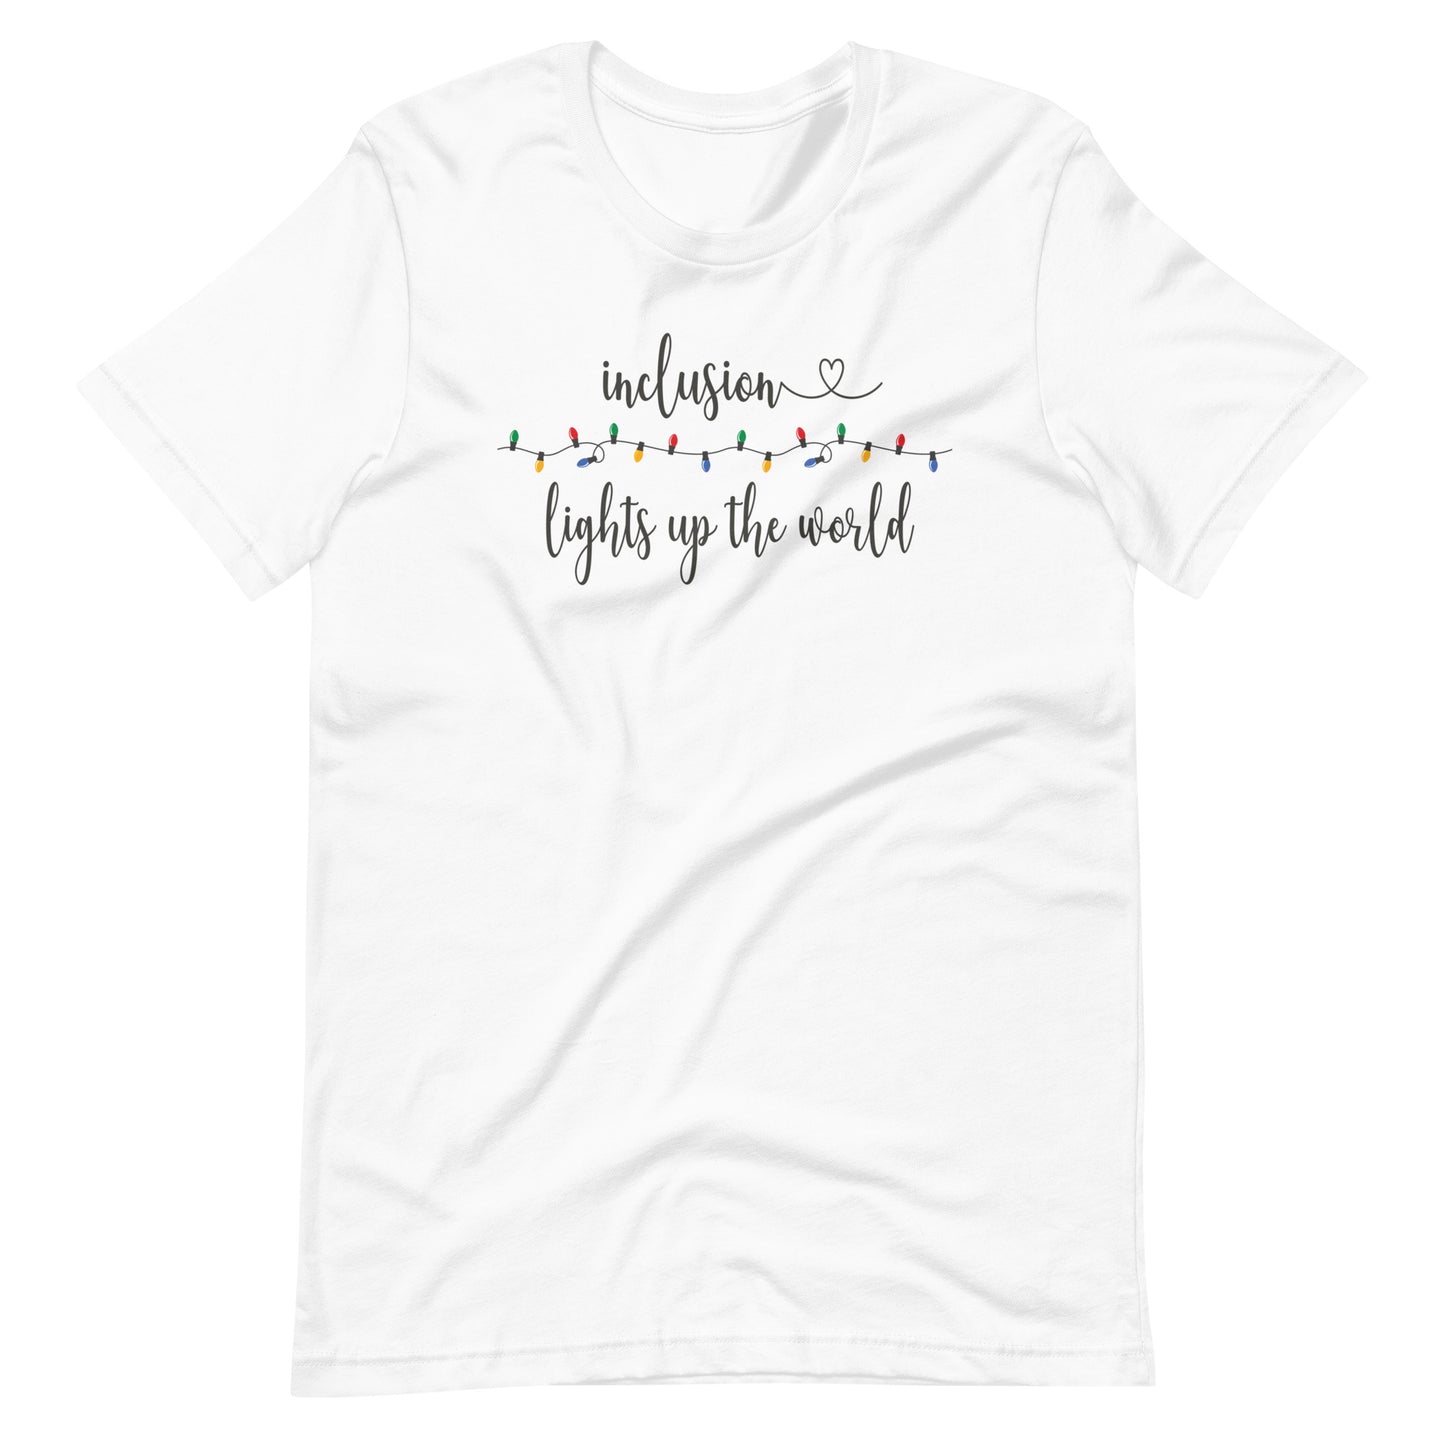 Inclusion Lights Up the World | Adult Unisex Tee